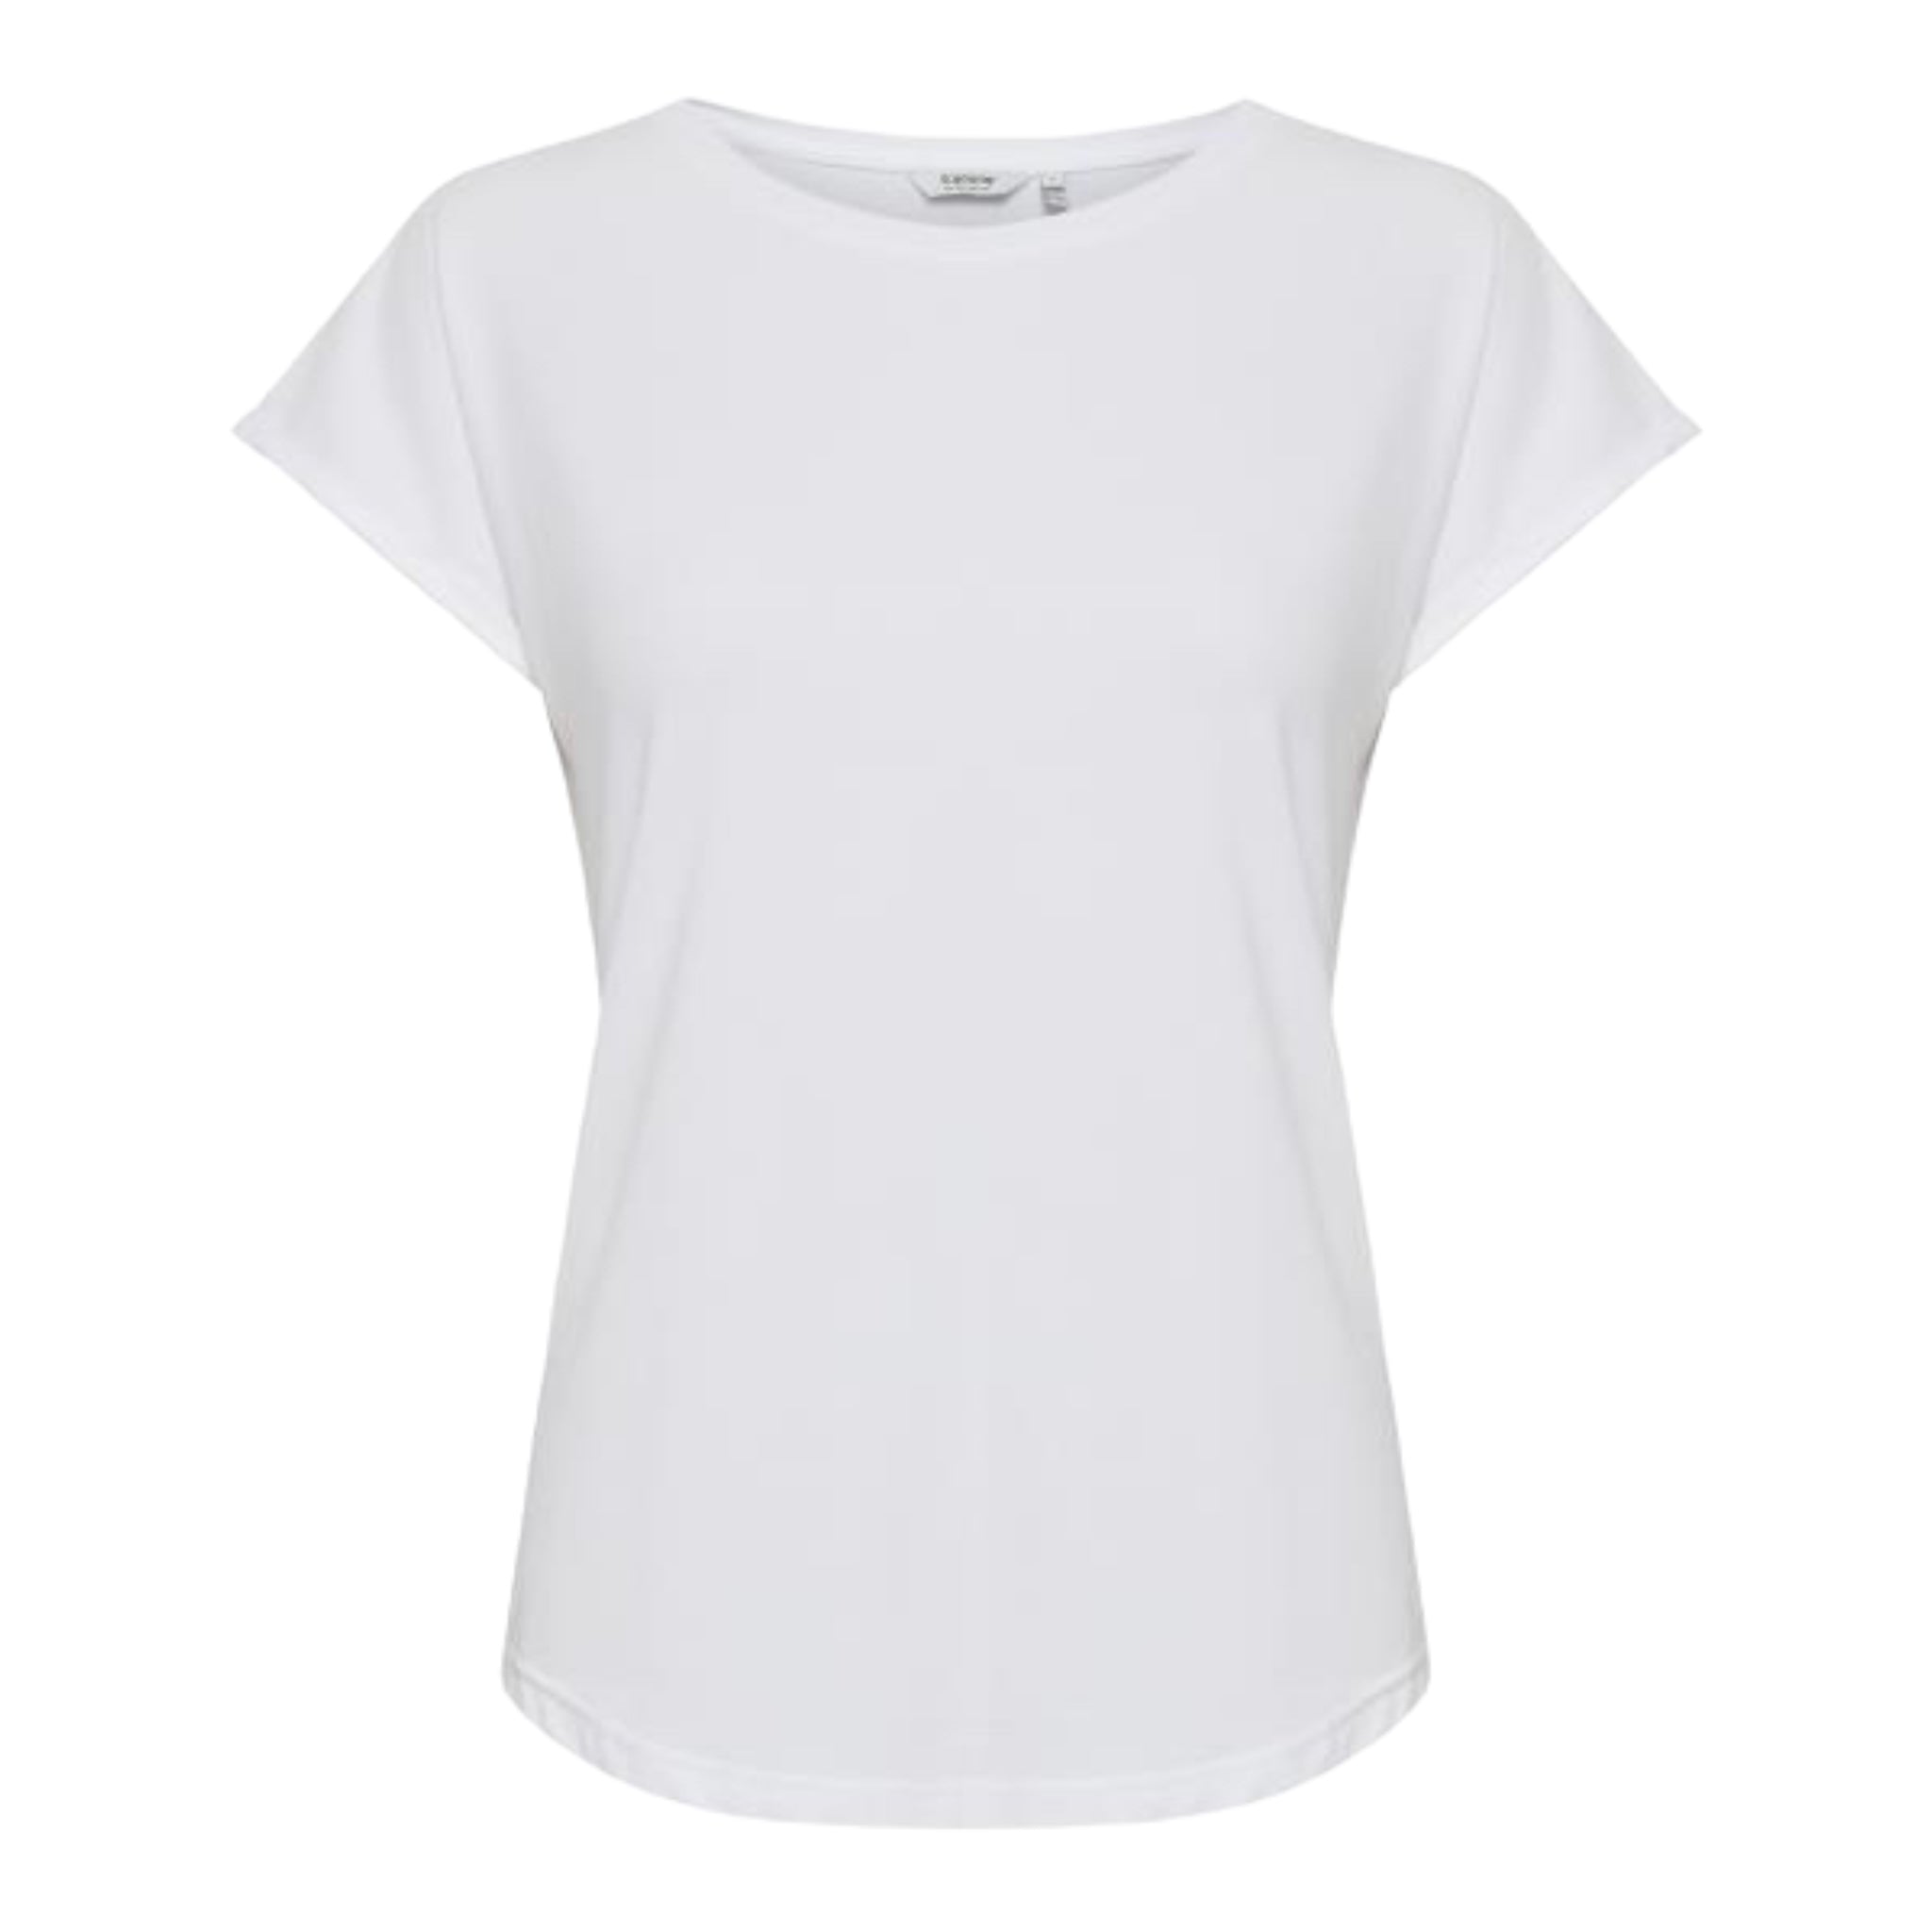 B-Young-Pamila-Short-Sleeve-T-Shirt-Optical-White-front